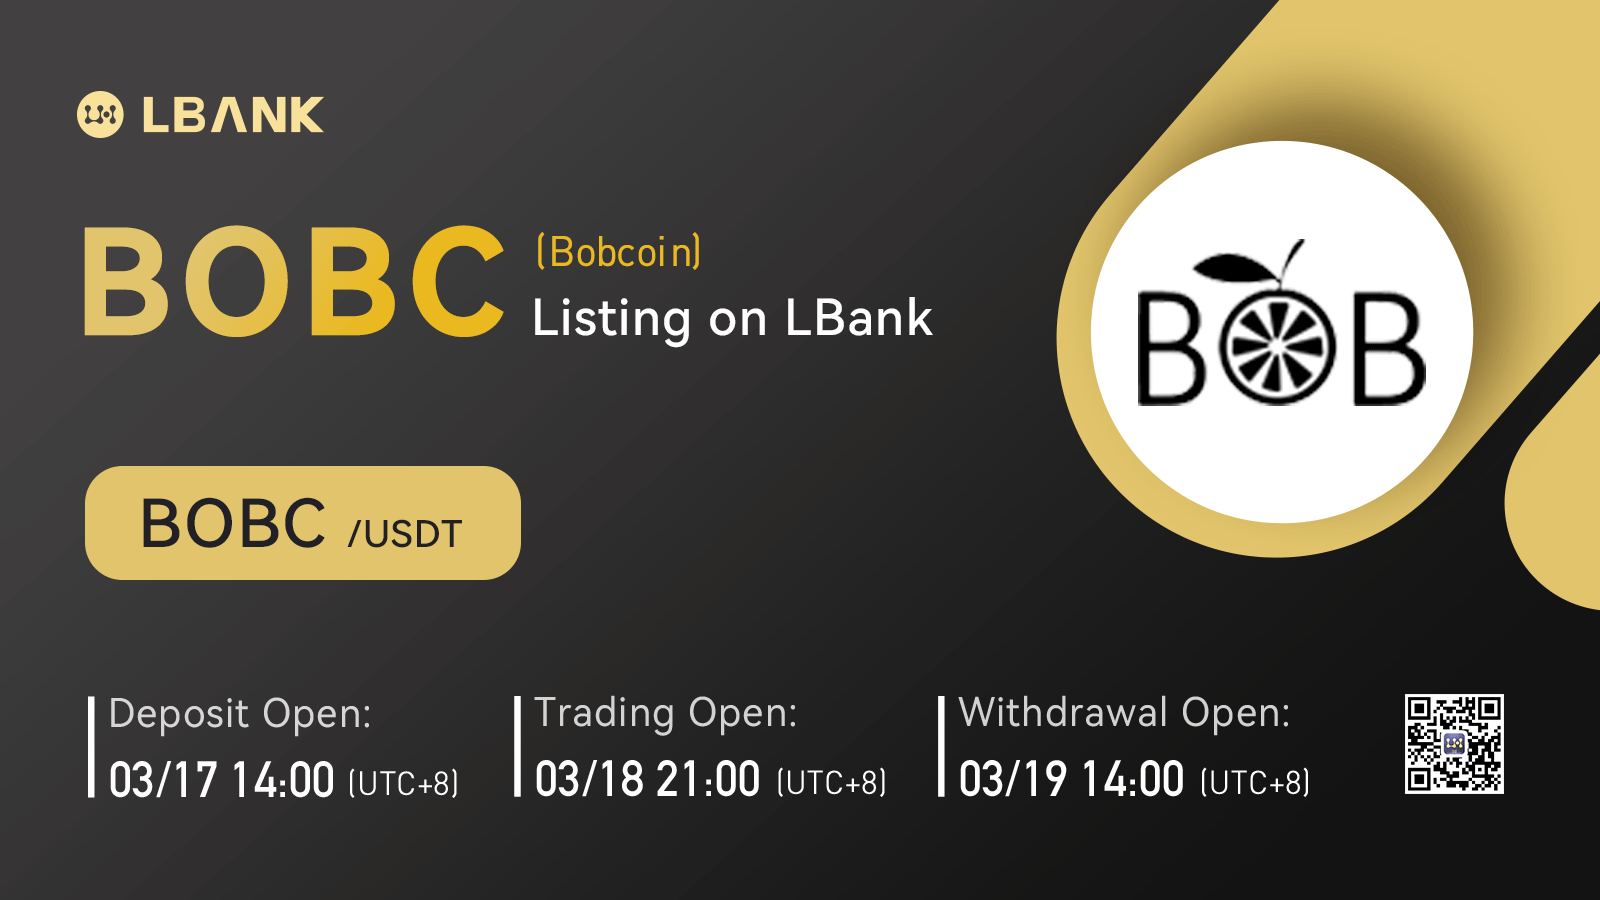 BREAKING - $BOBC (Bobcoin) will soon be listed on LBank!  